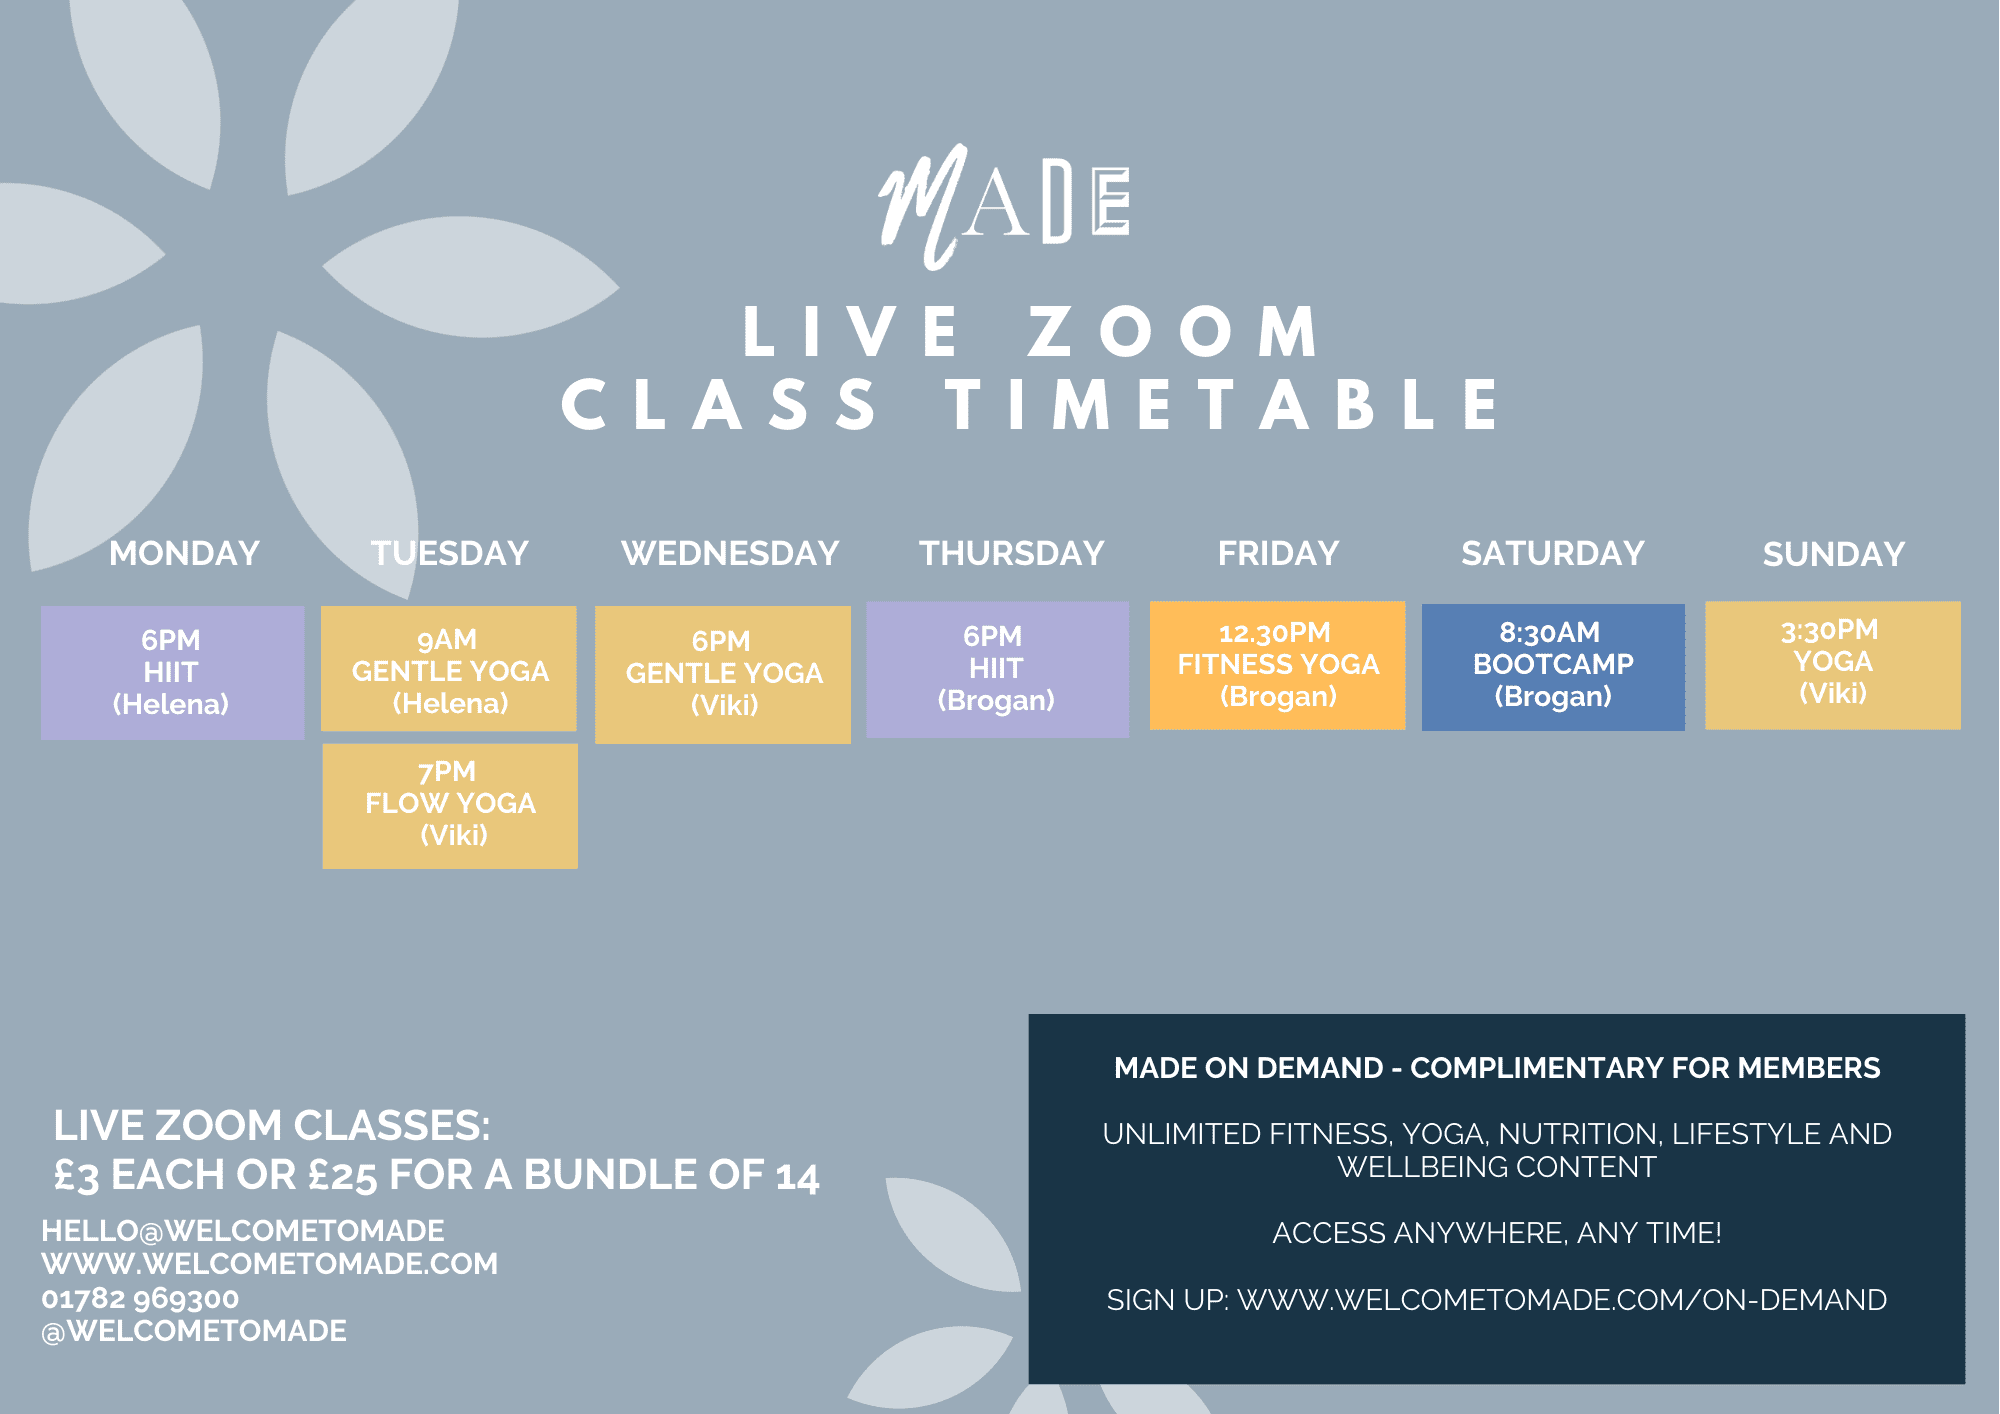 MADE CLASSES TIMETABLES